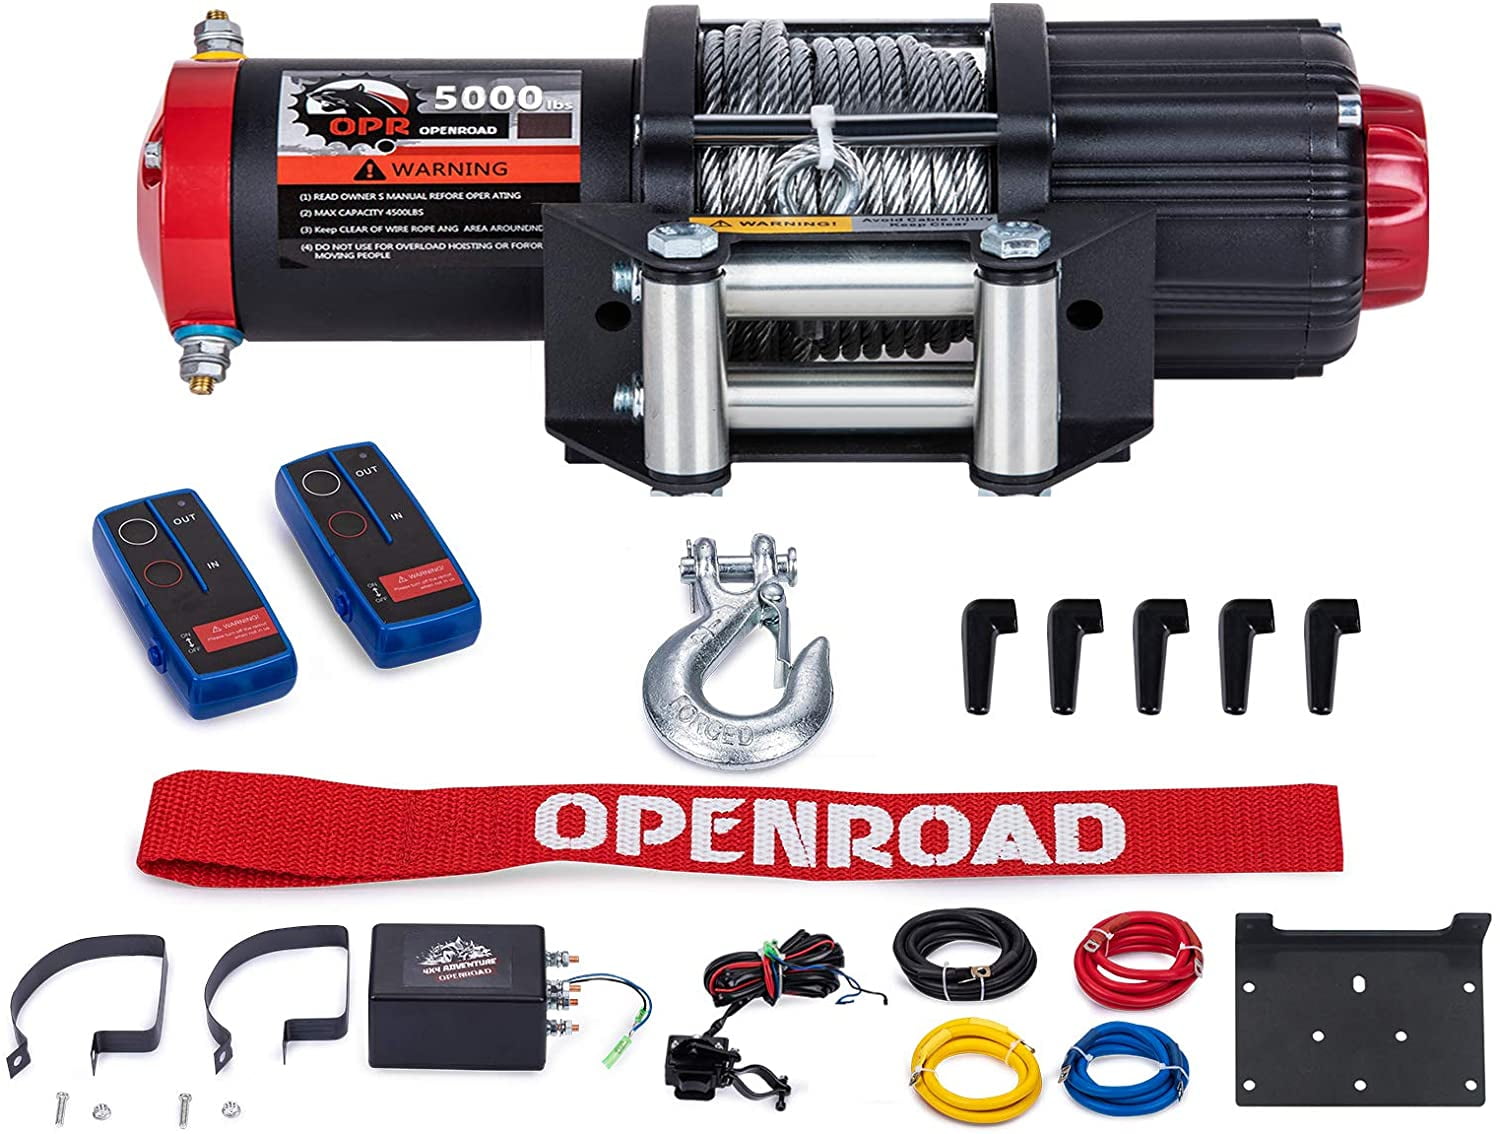 OPENROAD 12V 3500lbs Winch Kit,Electric Winch with Red Synthetic Rope,Towing Winch with Wireless Remote Control,Waterpoof Winch Control Box 